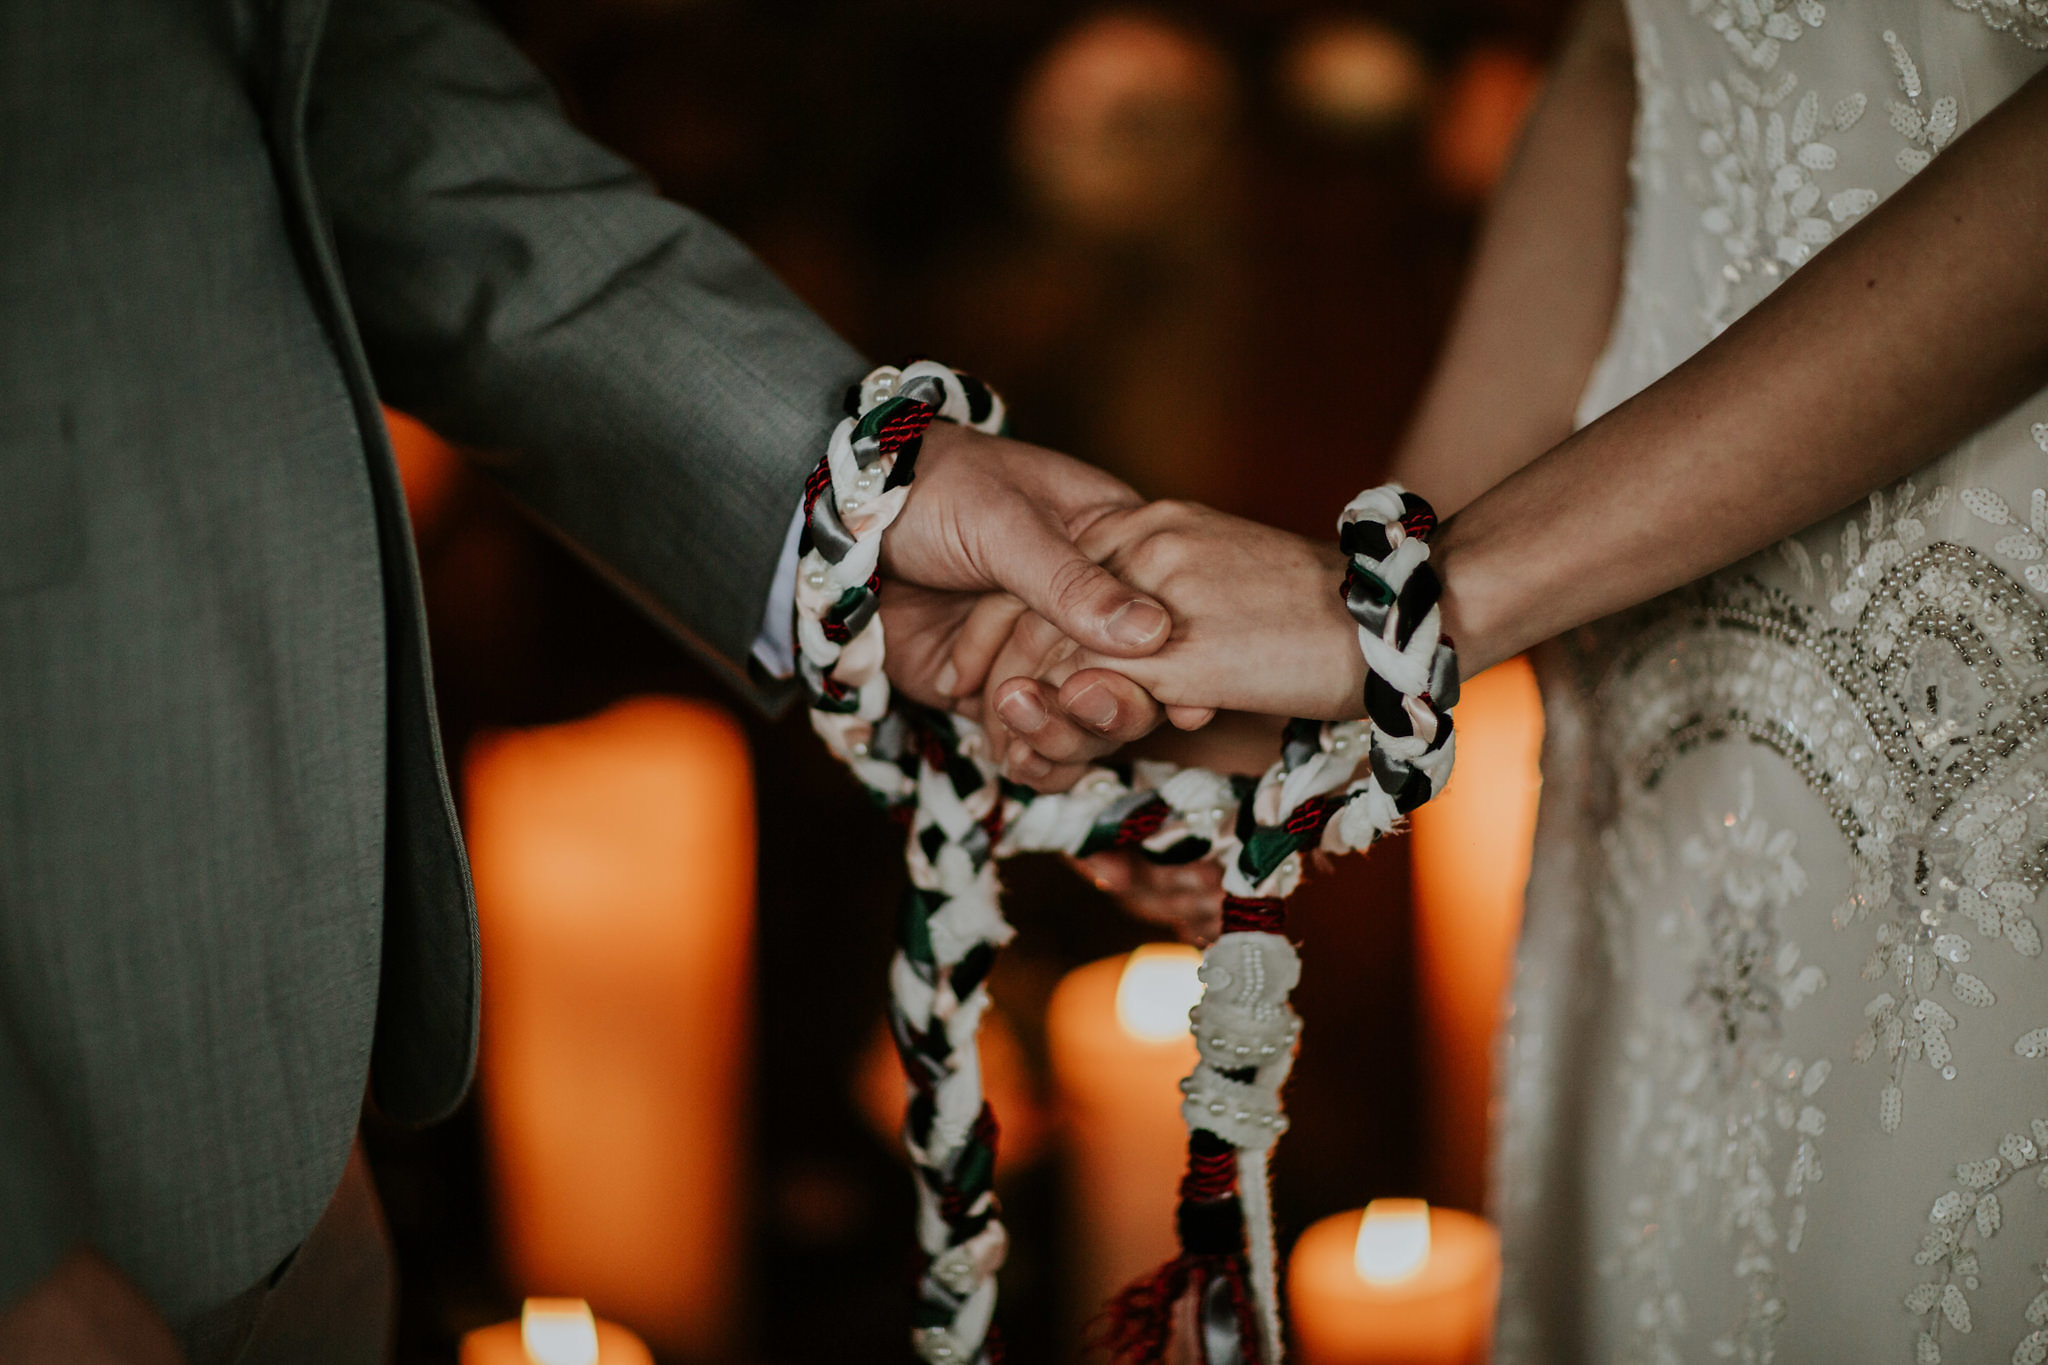 The couple went through an Irish tradition with hand fastening